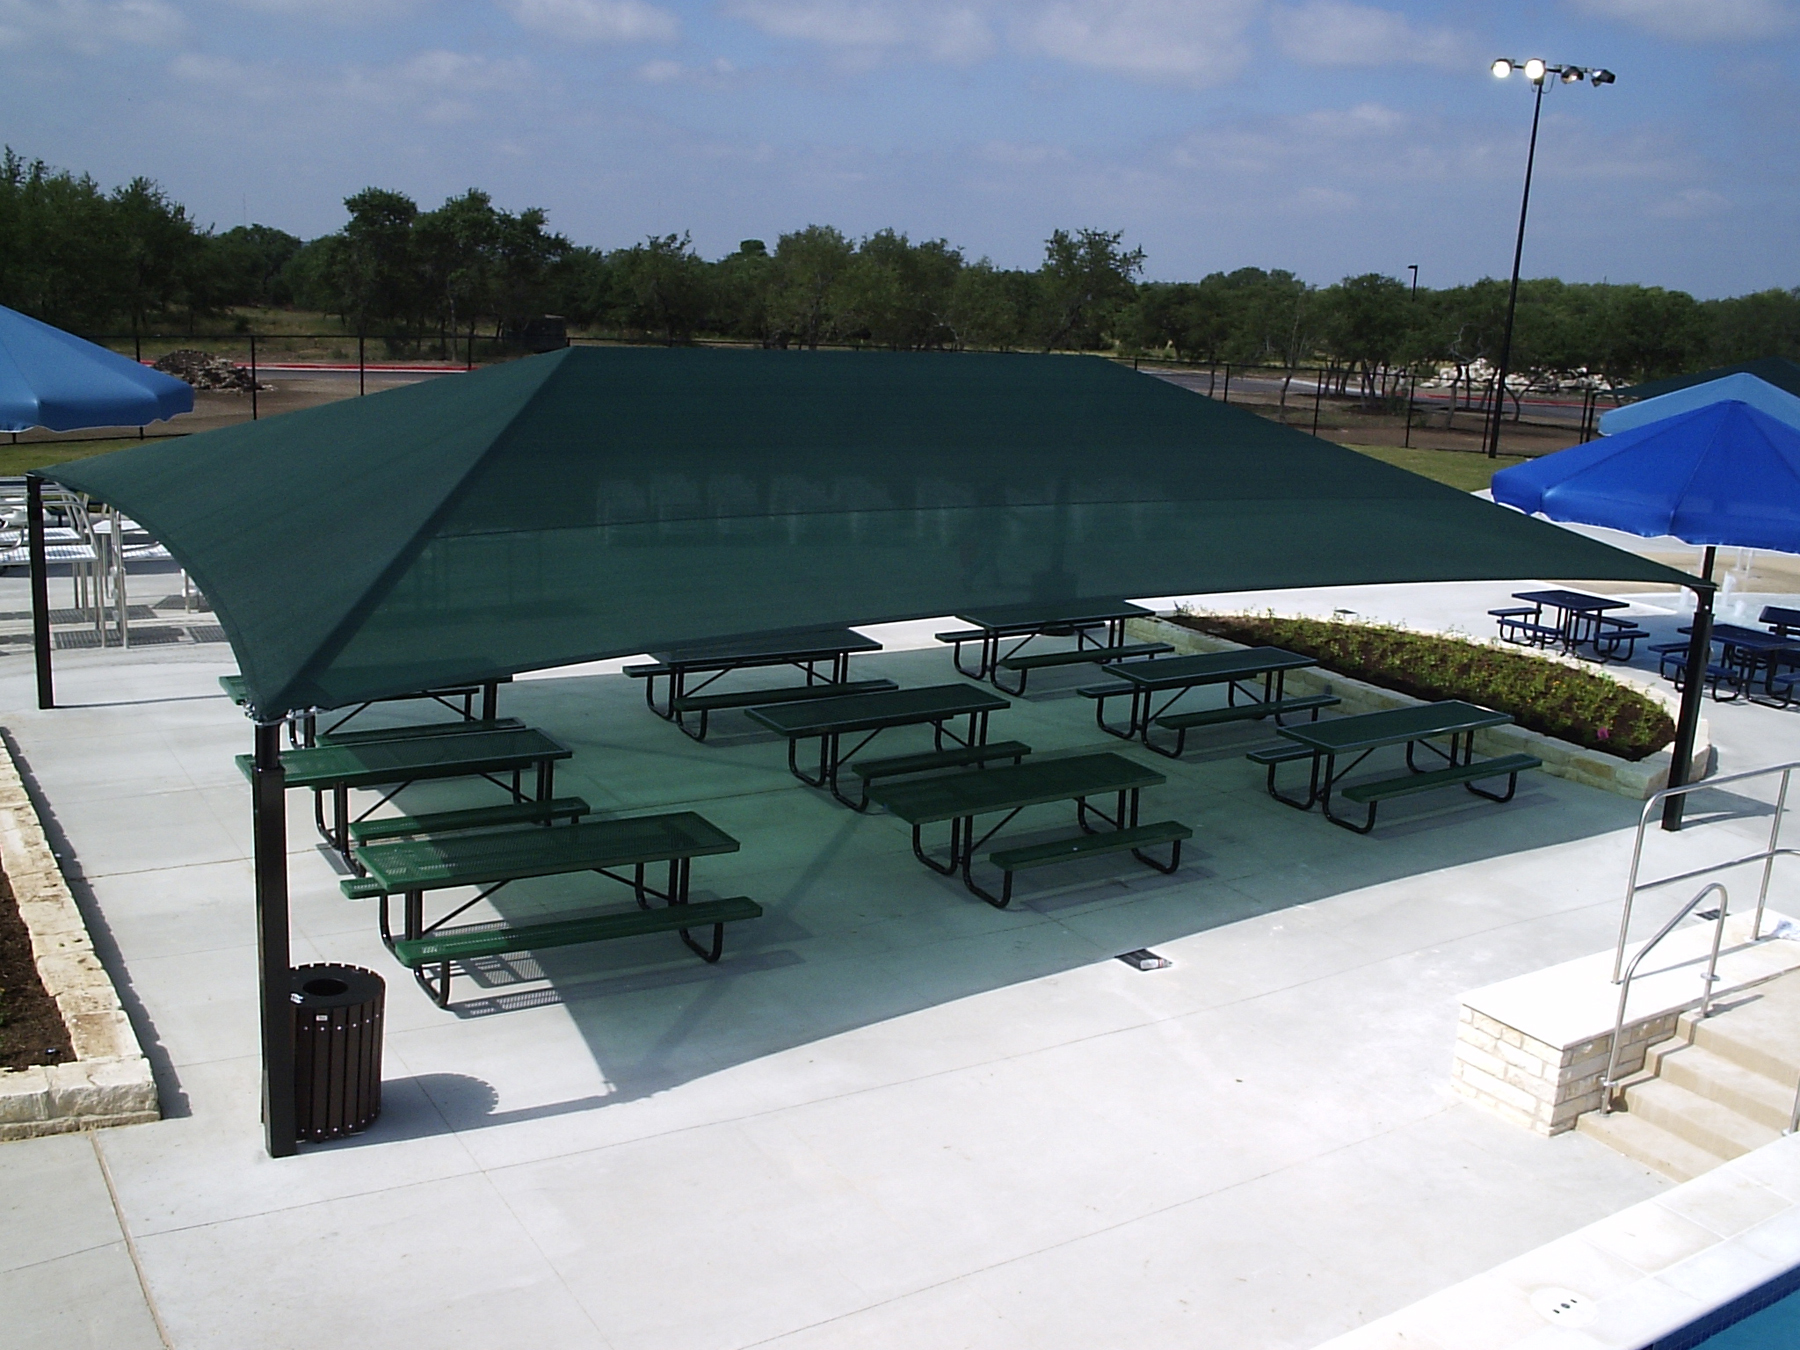 large usa shade covering multiple picnic tables